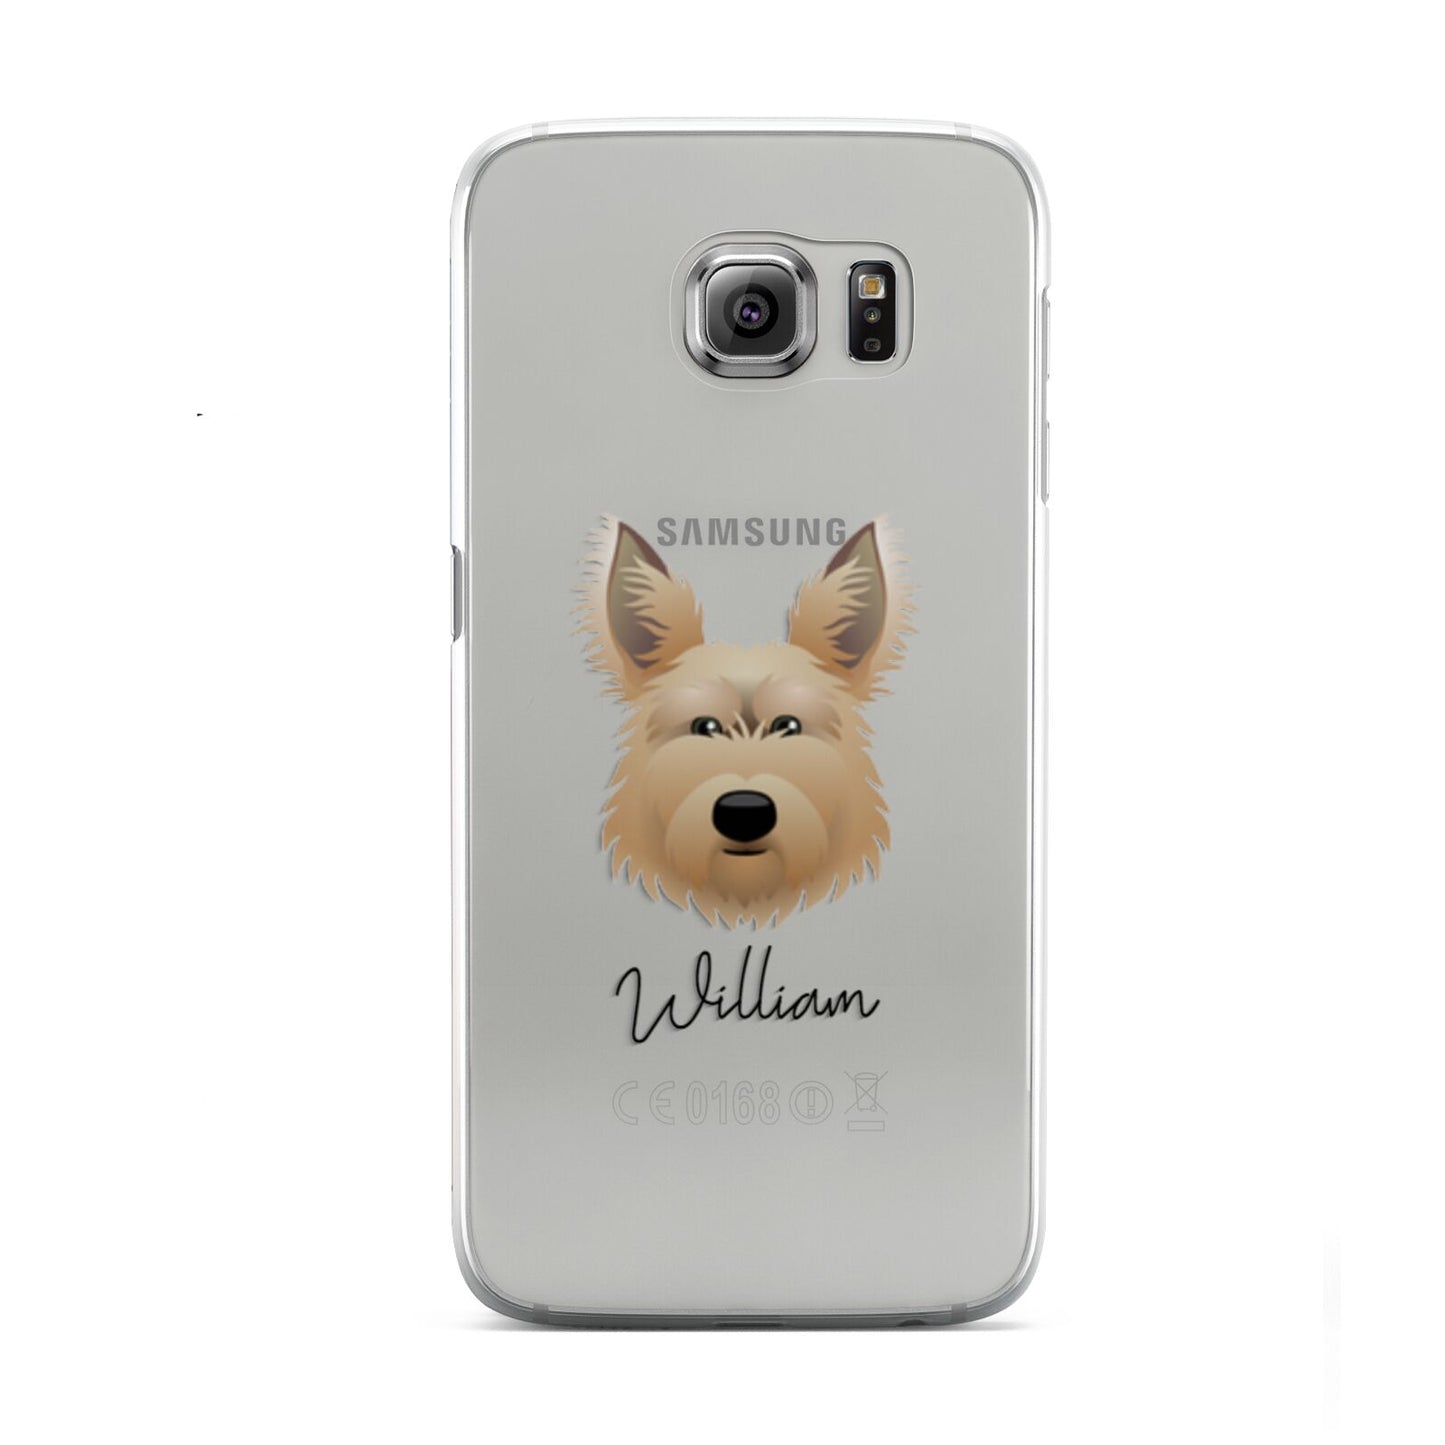 Picardy Sheepdog Personalised Samsung Galaxy S6 Case